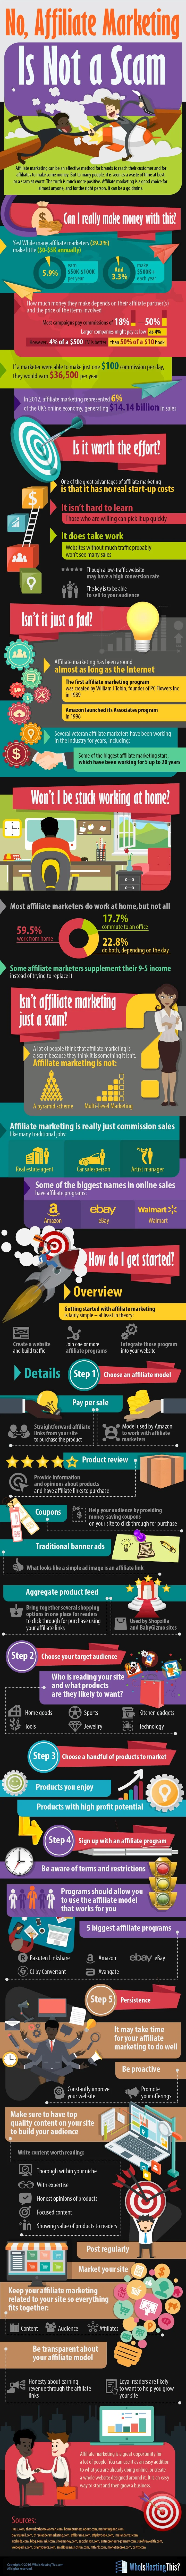 Can You Really Make Money with Affiliate Marketing? - #infographic